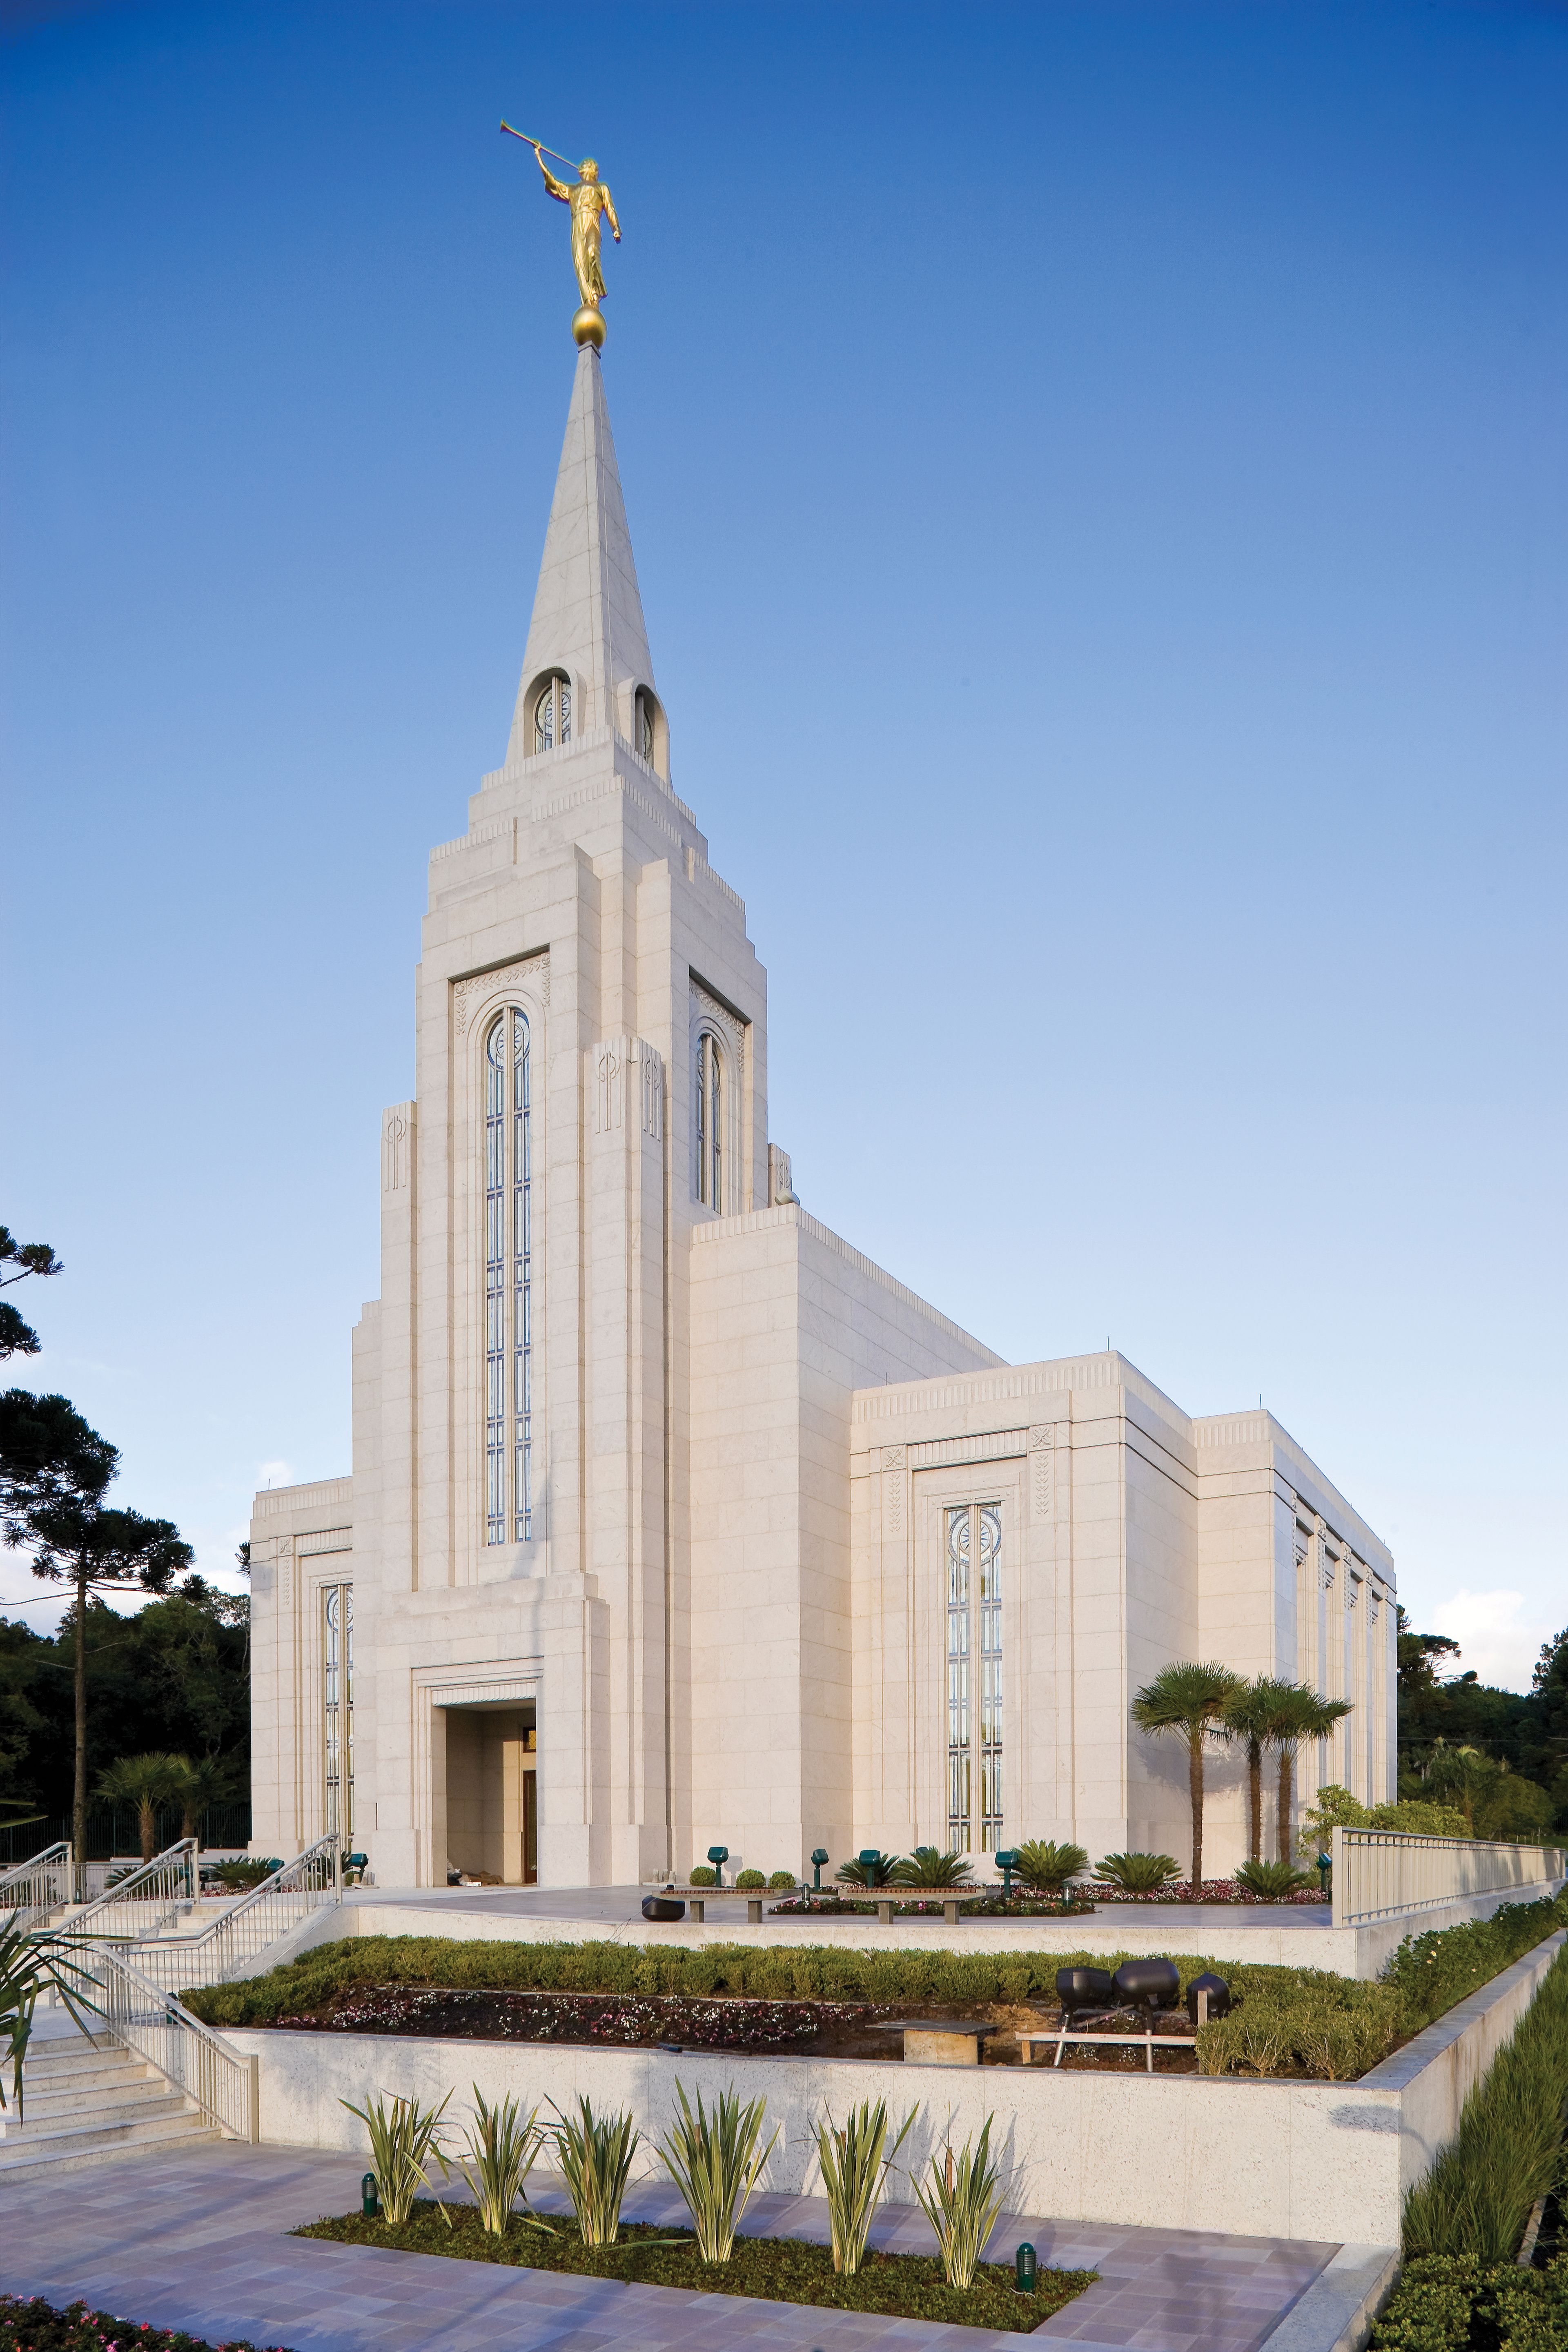 The Curitiba Brazil Temple during the day.